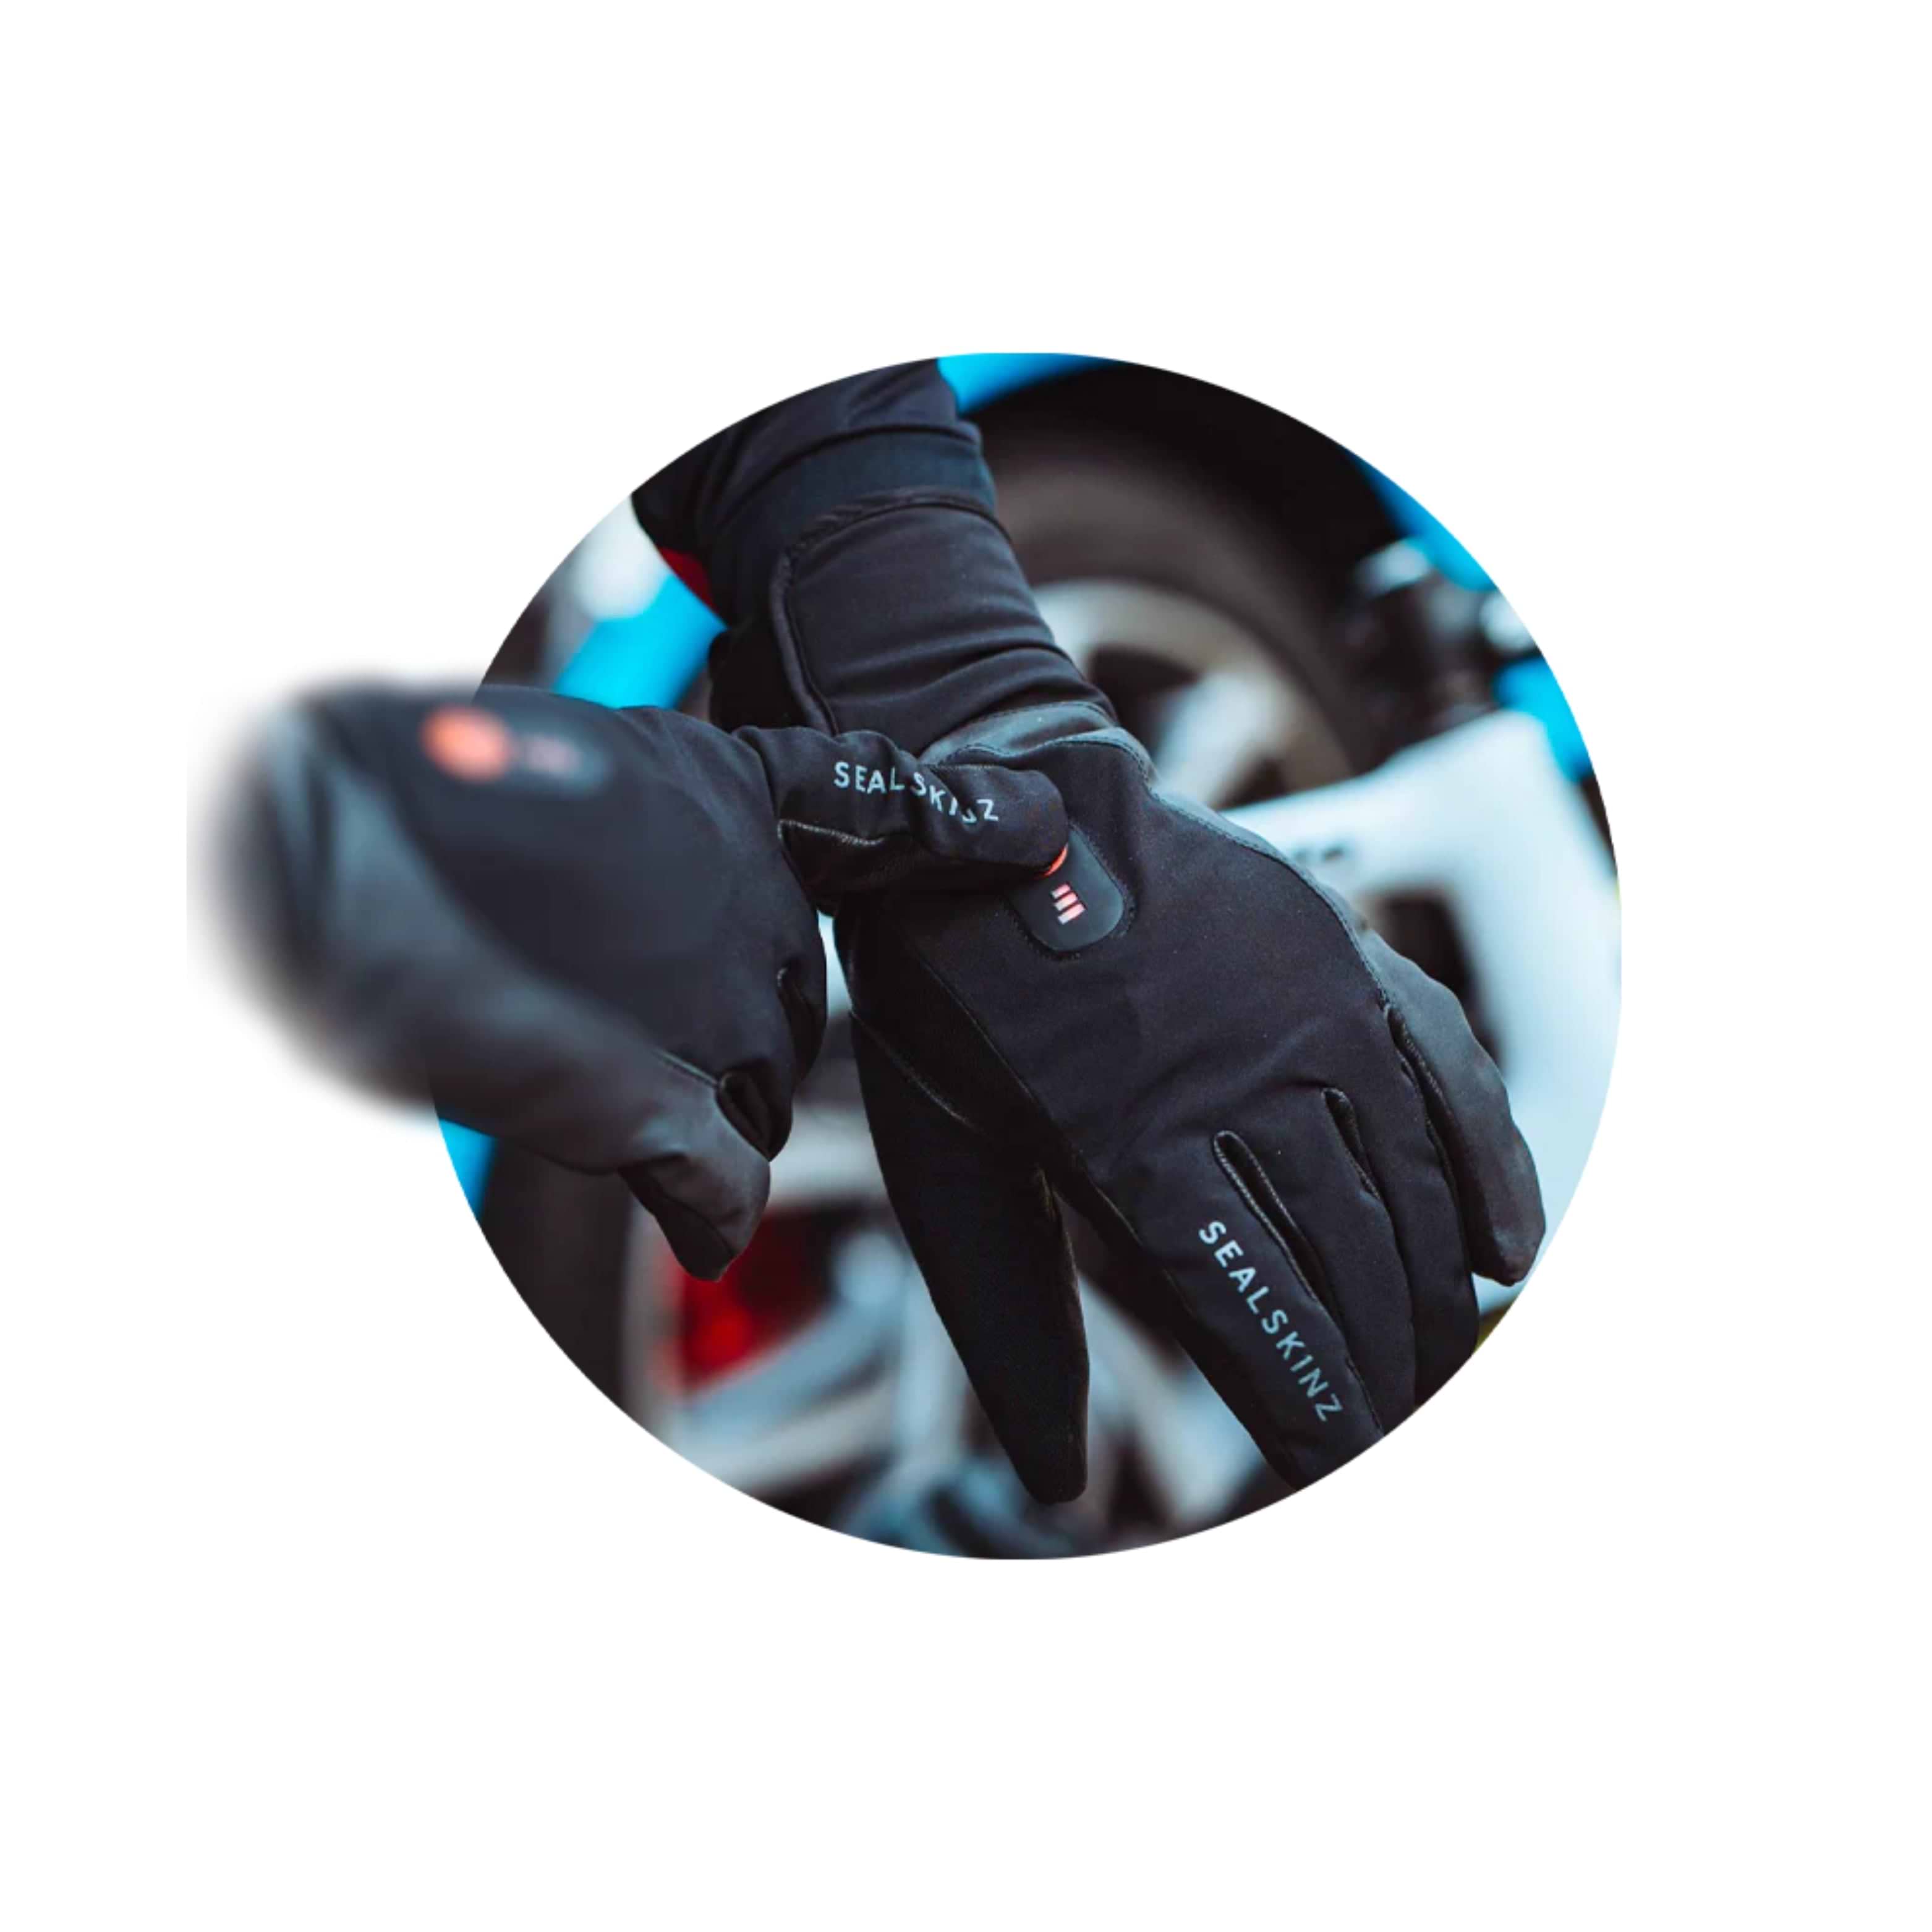 Heated Gloves for Winter Cycling - Volt Heat